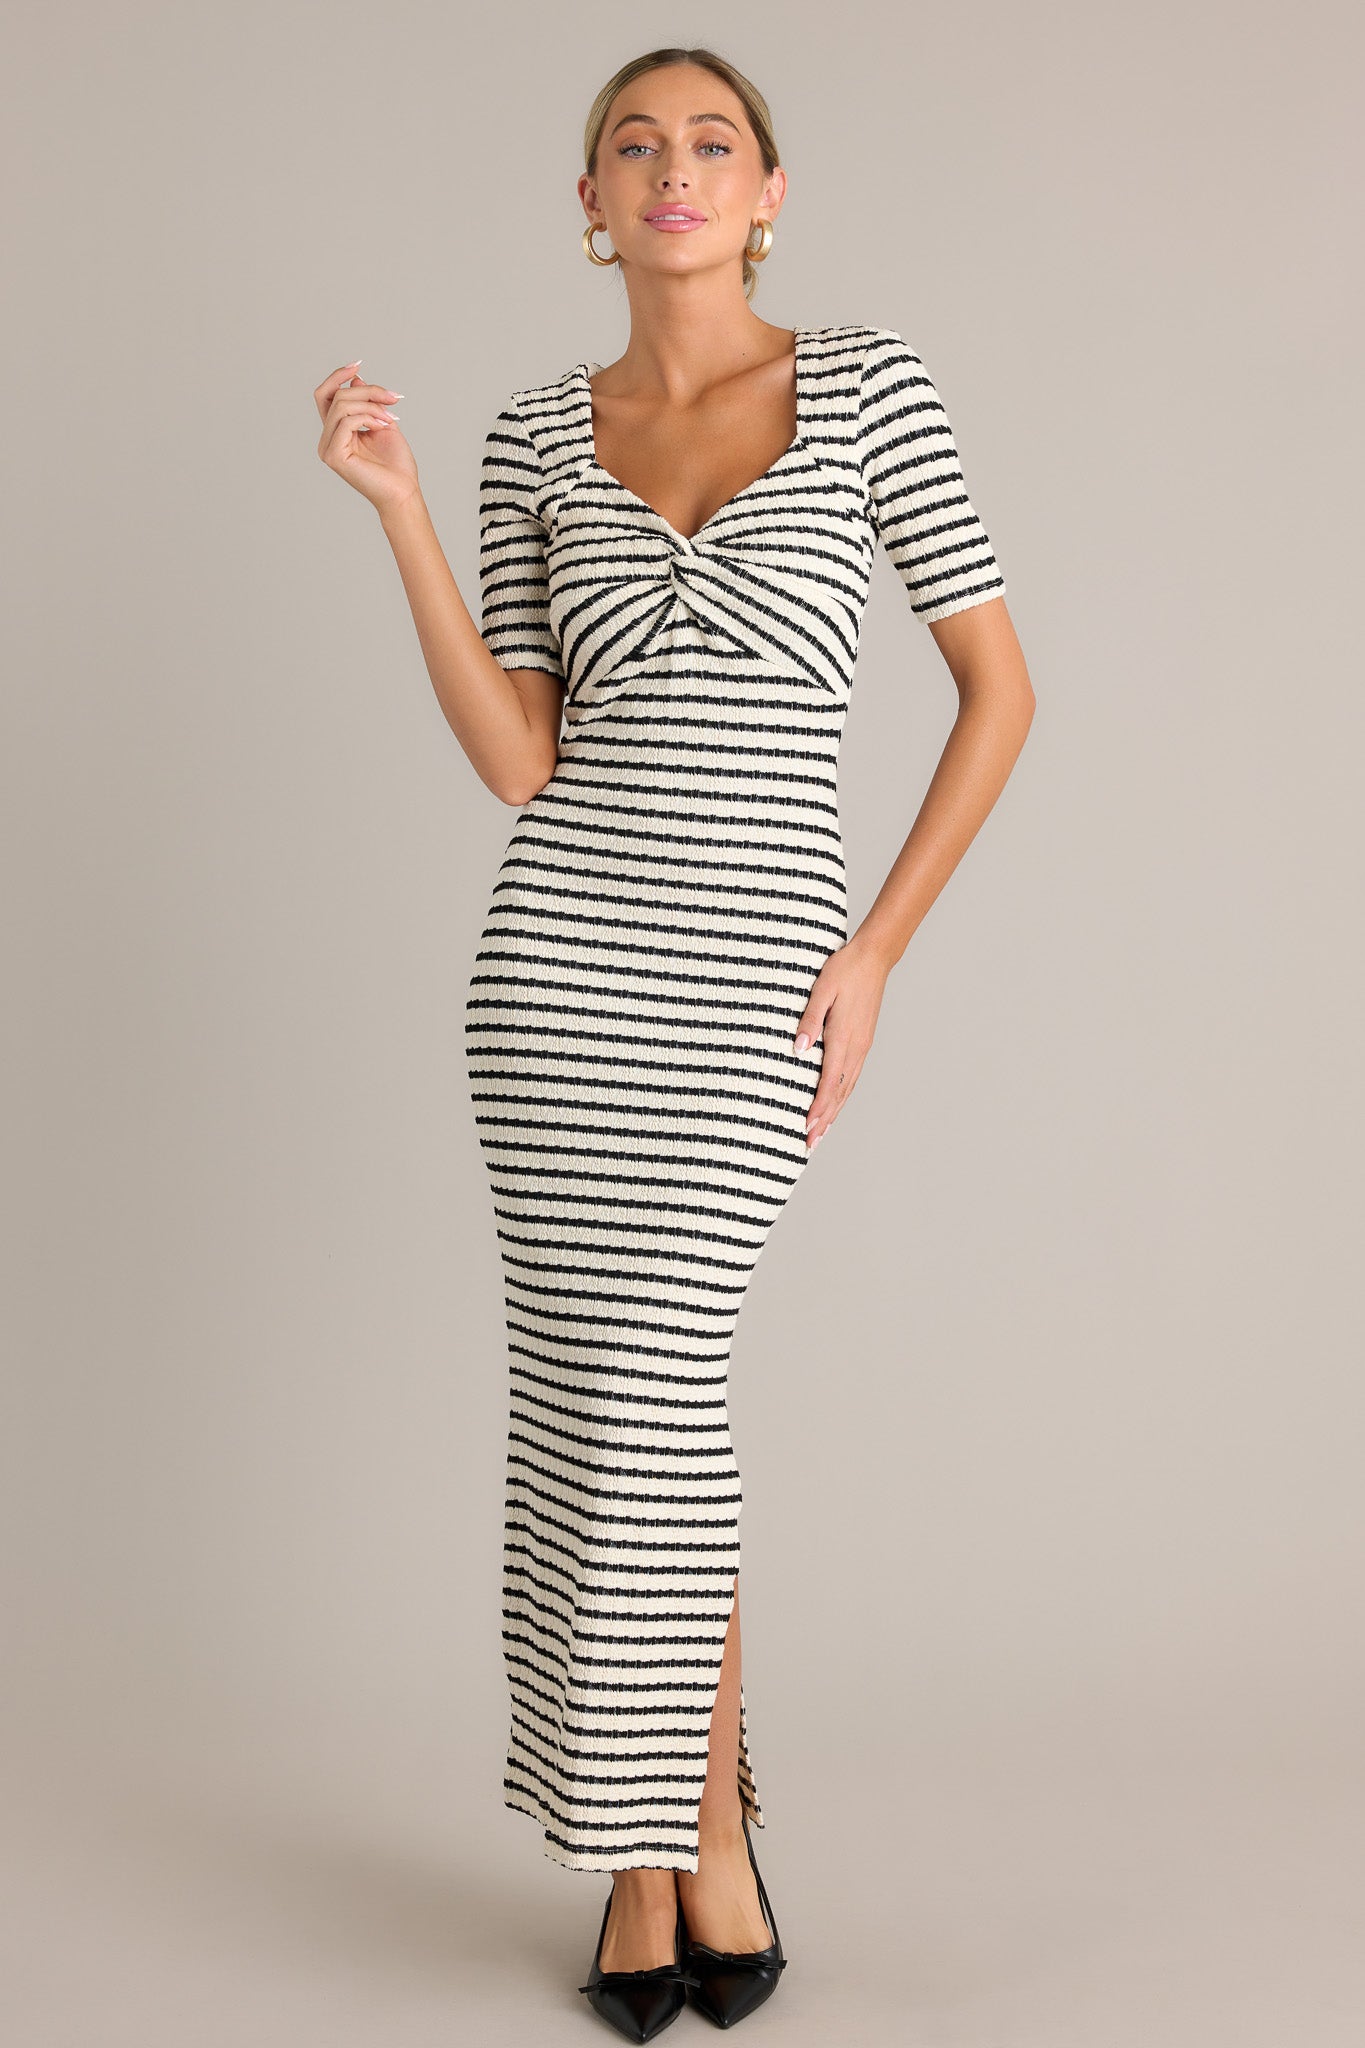 Full view of this black stripe maxi dress featuring a v-neckline, a twisted bust detail, a bodycon fit, a textured fabric, a side slit, and short sleeves.